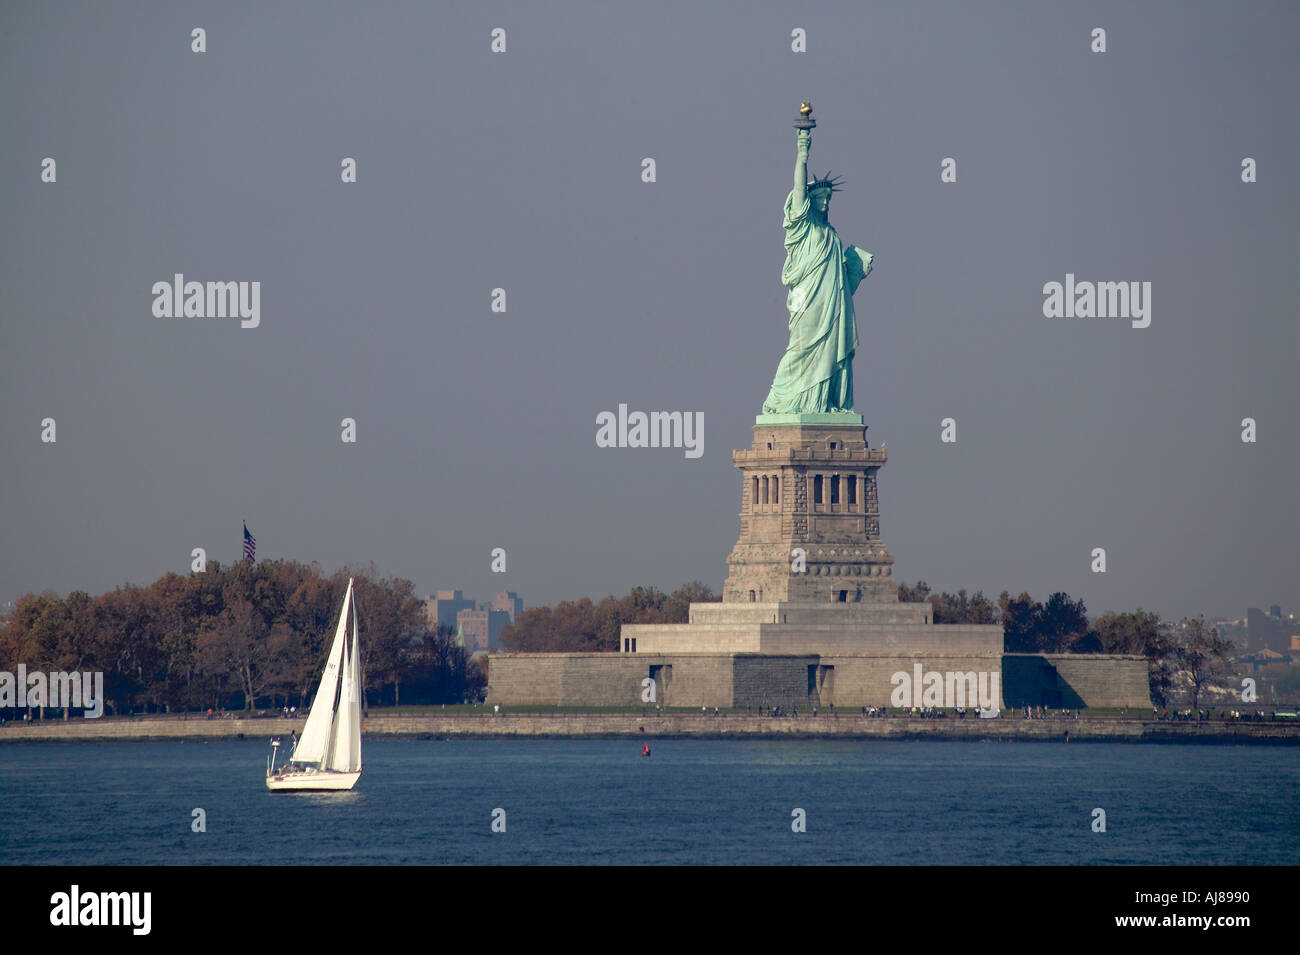 Sailboat on the Hudson River with Statue of Liberty in background New York NY Stock Photo